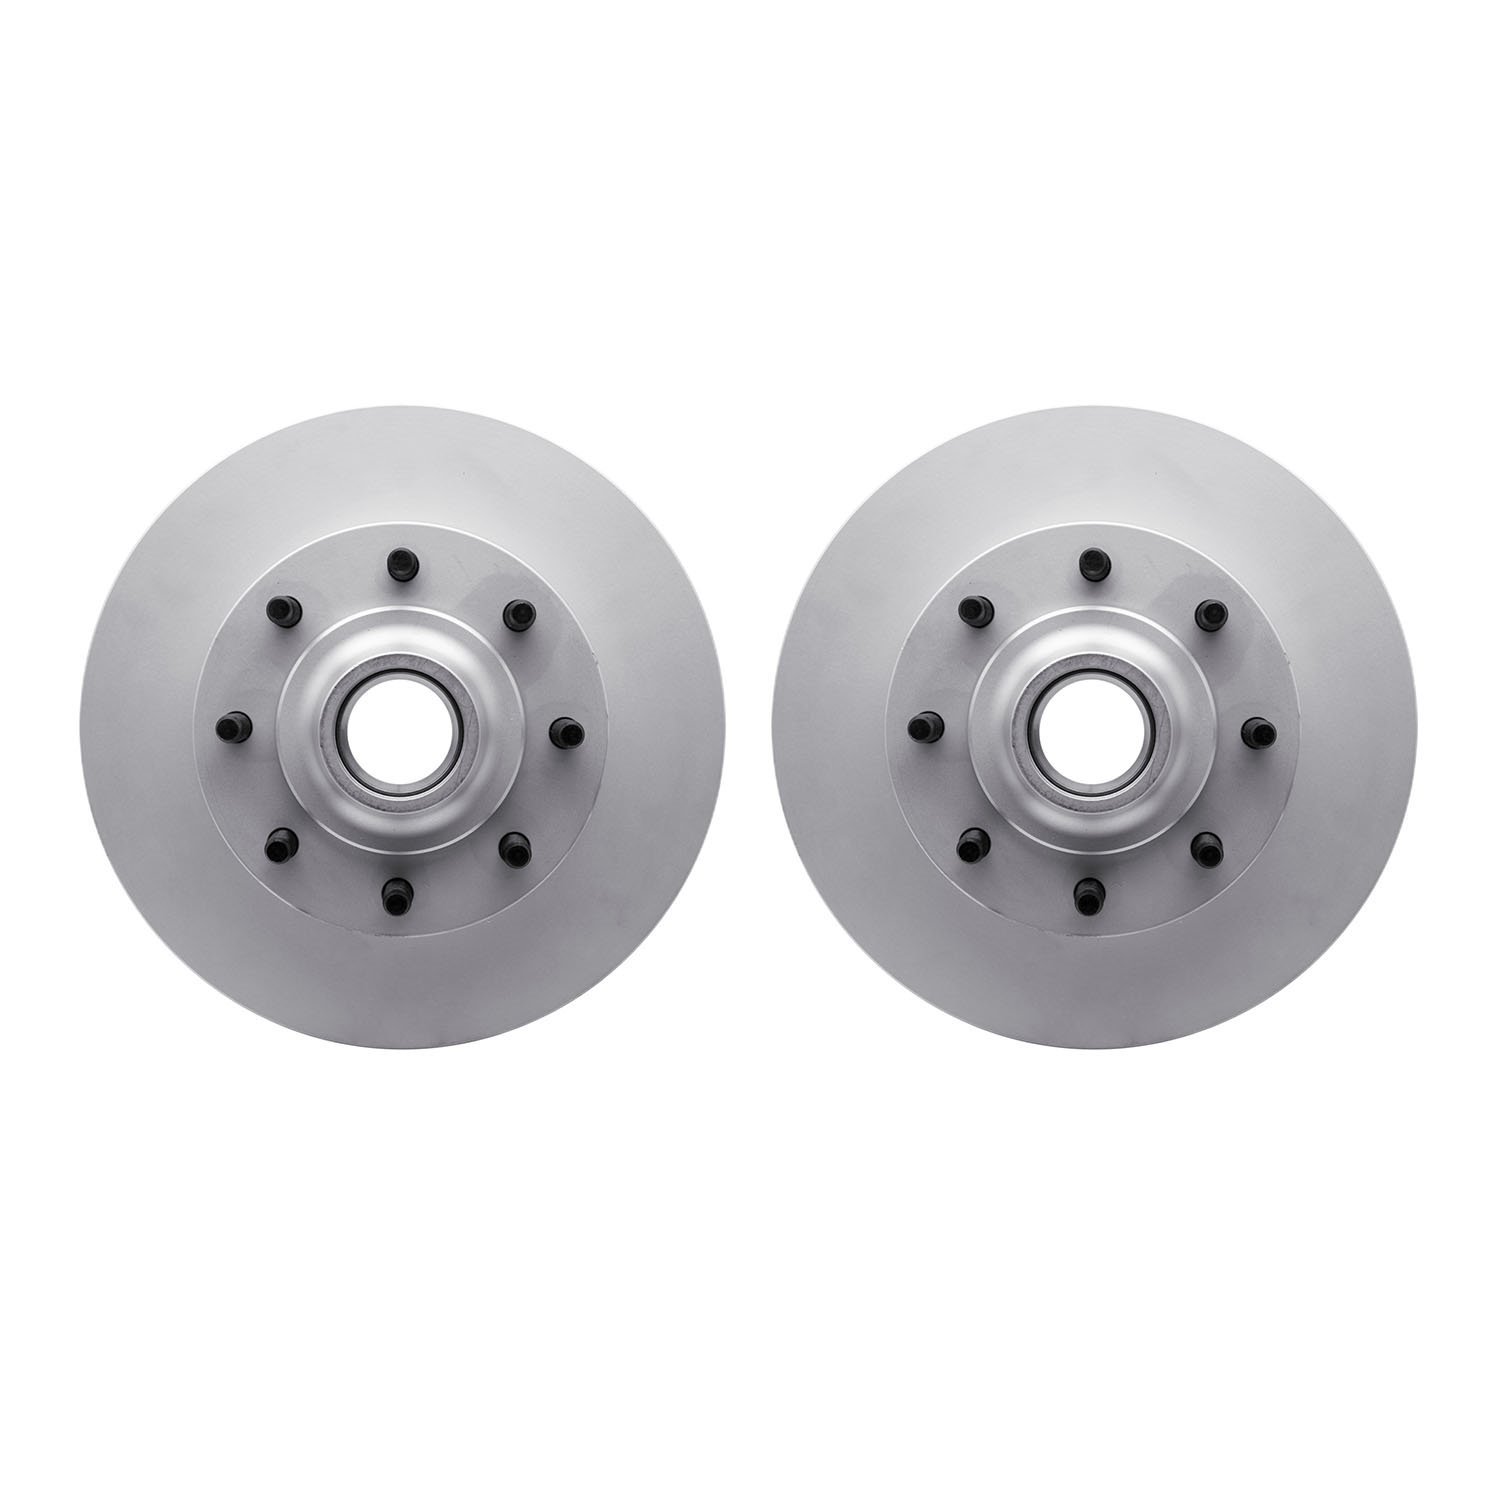 4002-54128 Geospec Brake Rotors, Fits Select Ford/Lincoln/Mercury/Mazda, Position: Front